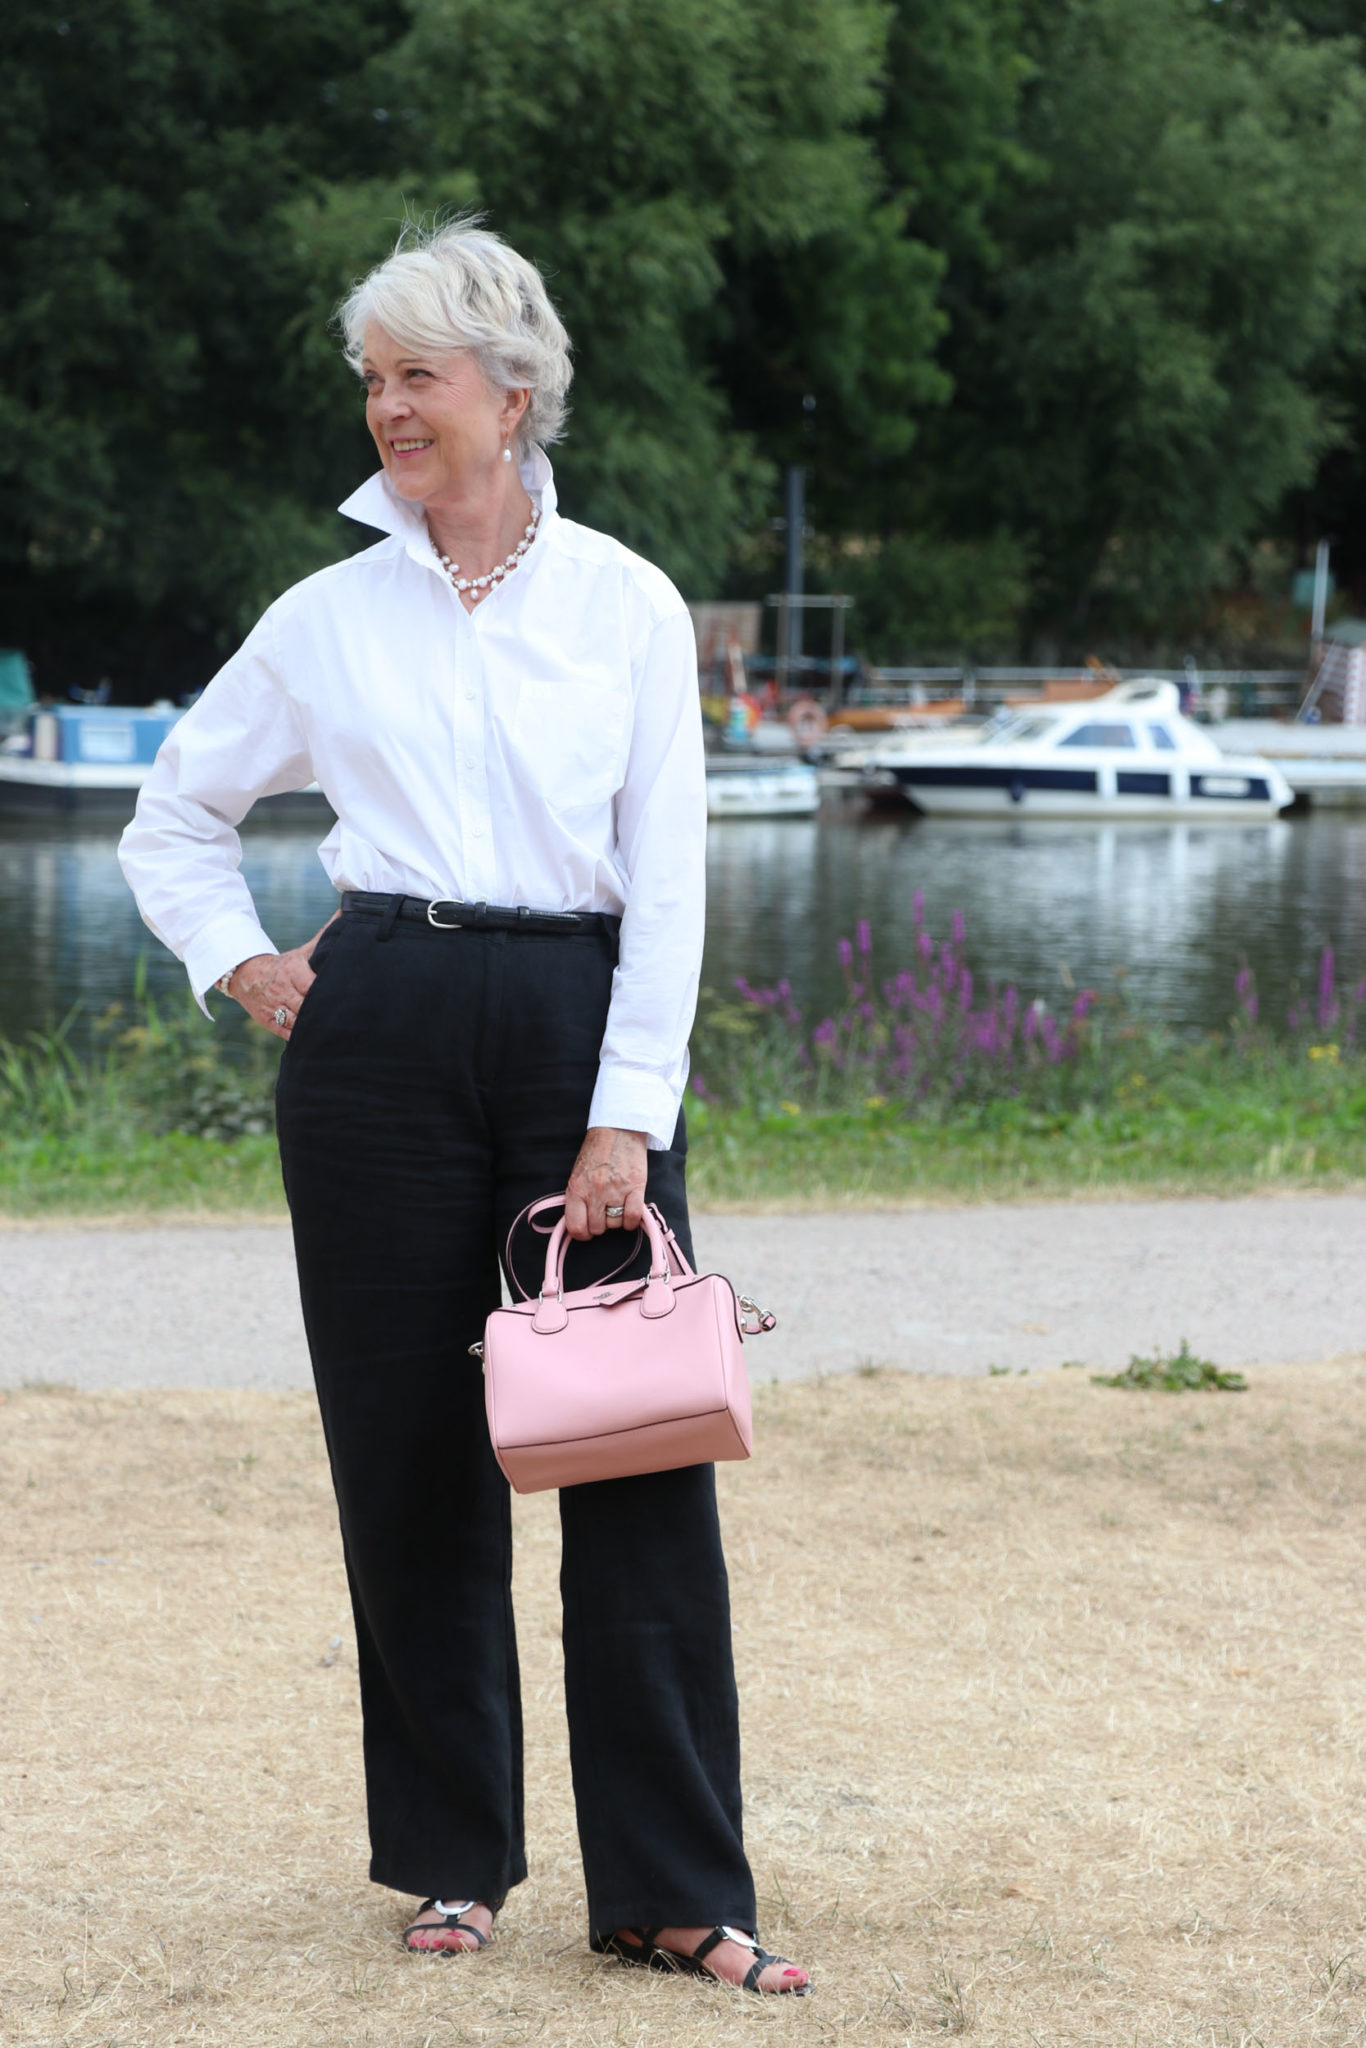 A classic Summer look - Chic at any age